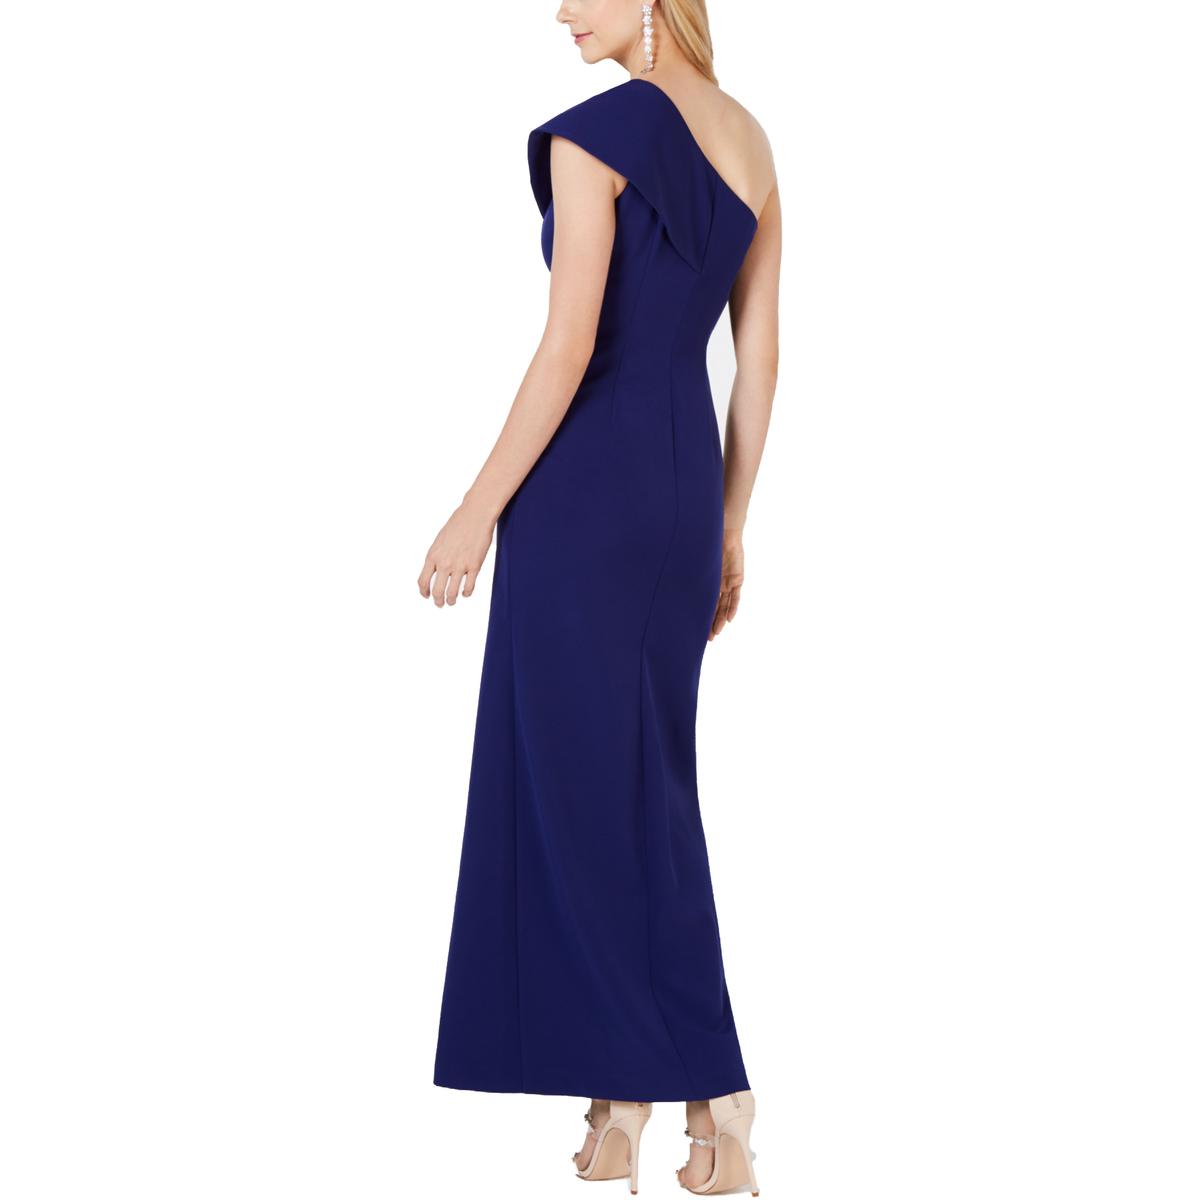 Vince Camuto Womens Navy One Shoulder Formal Evening Dress Gown 12 BHFO ...